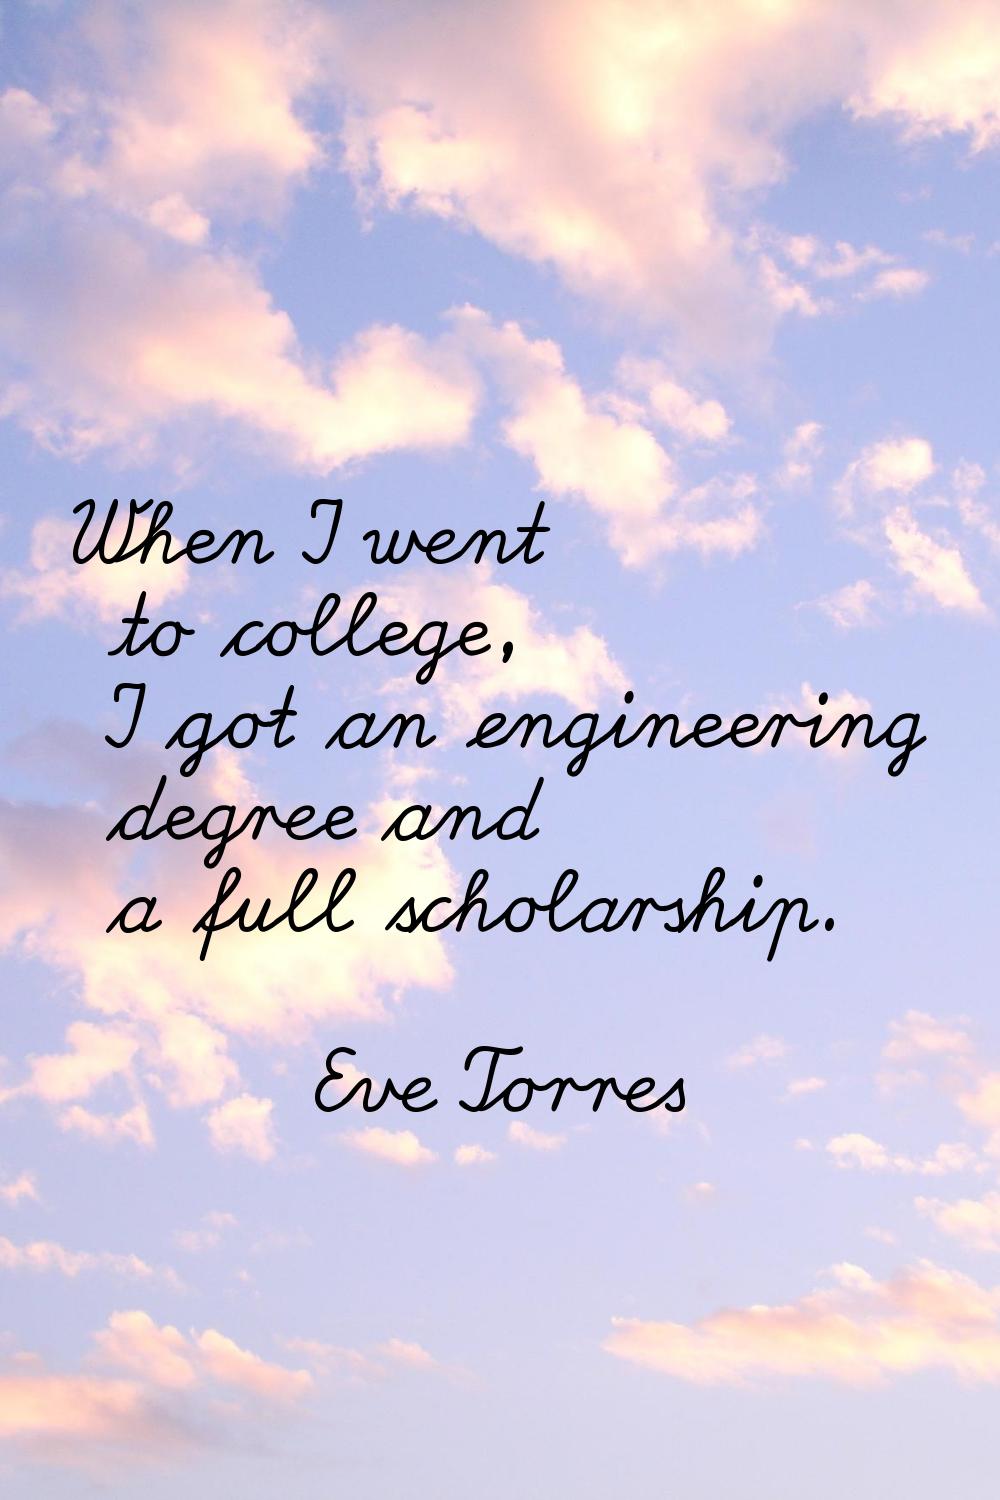 When I went to college, I got an engineering degree and a full scholarship.